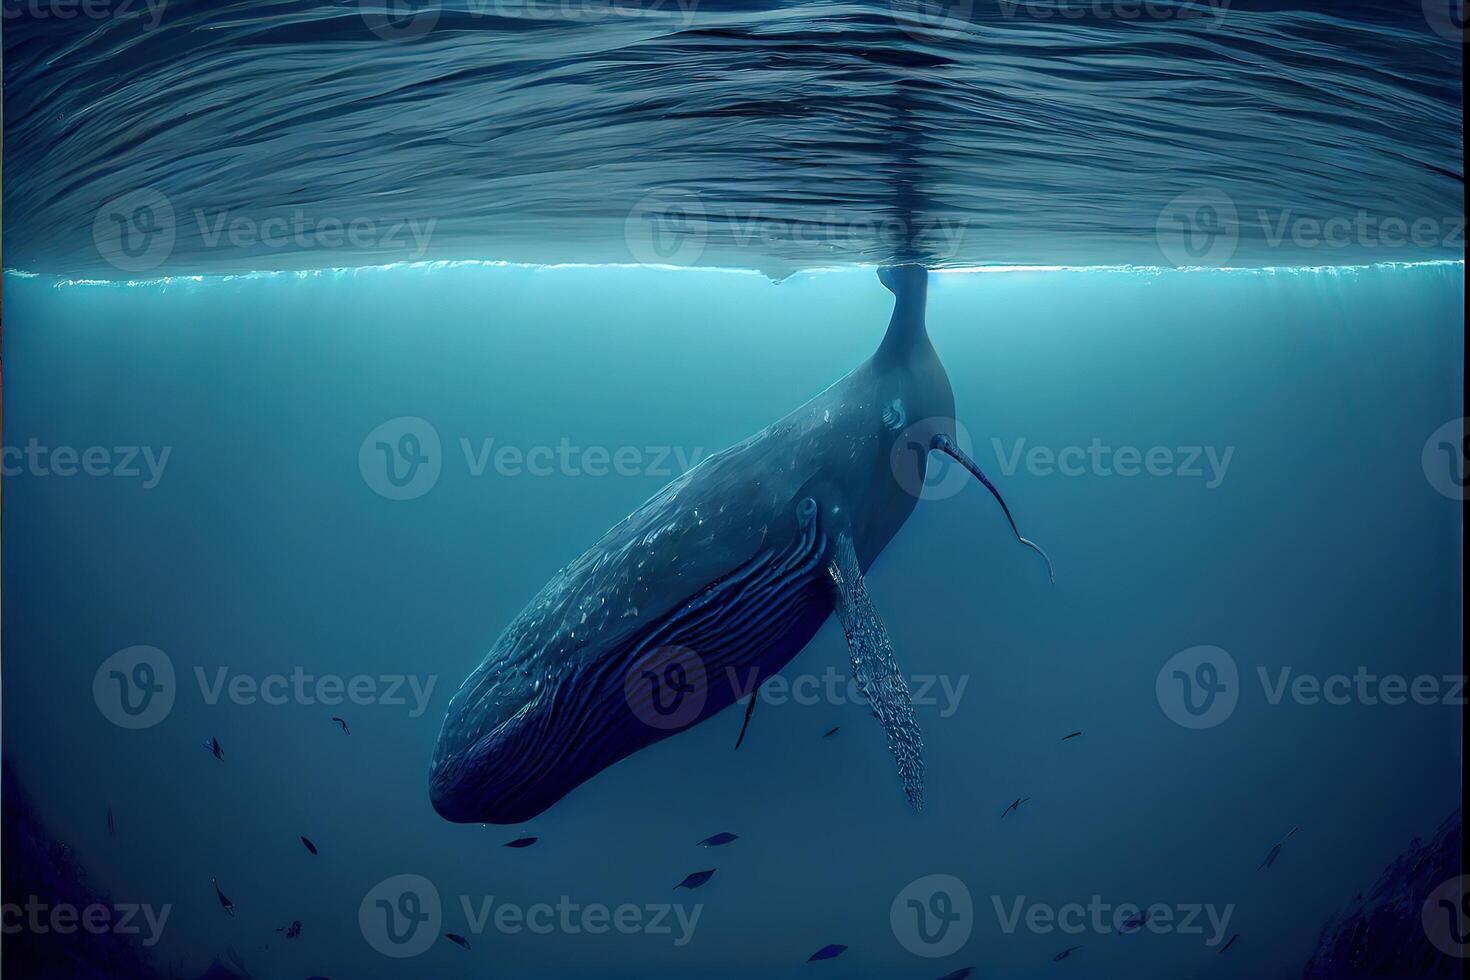 illustration of Blue whale under water, ocean photo